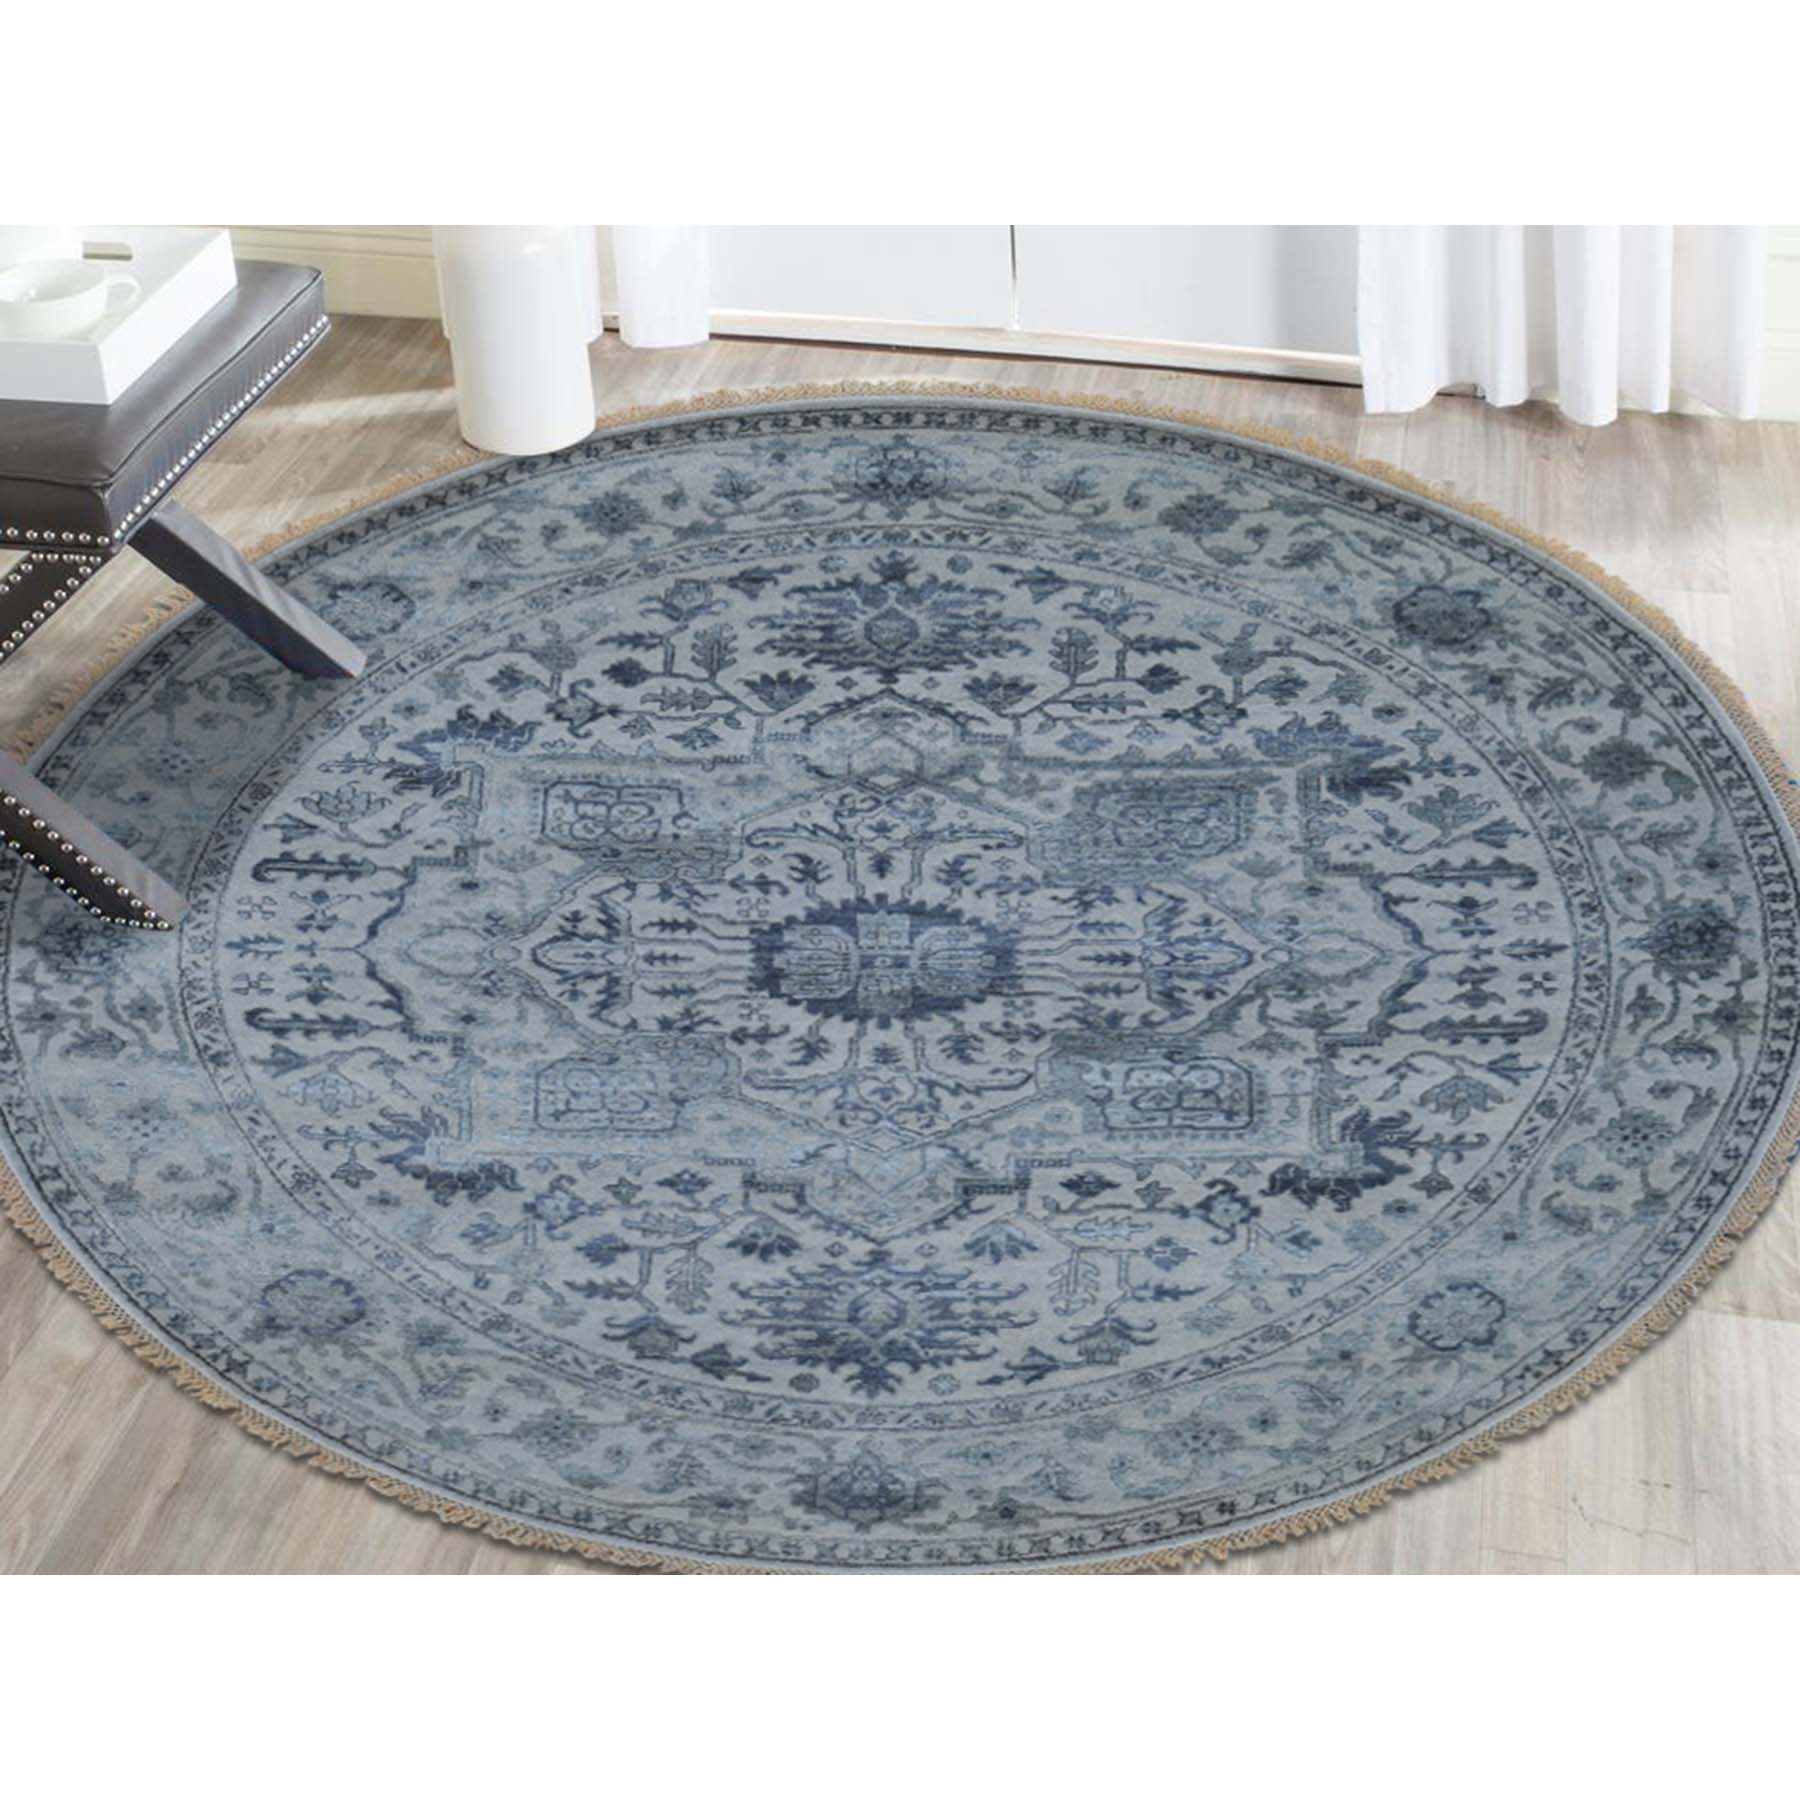 8-1 x8-1  Silver Heriz Design Wool And Silk Hi-lo Pile Hand-Knotted Round Oriental Rug 